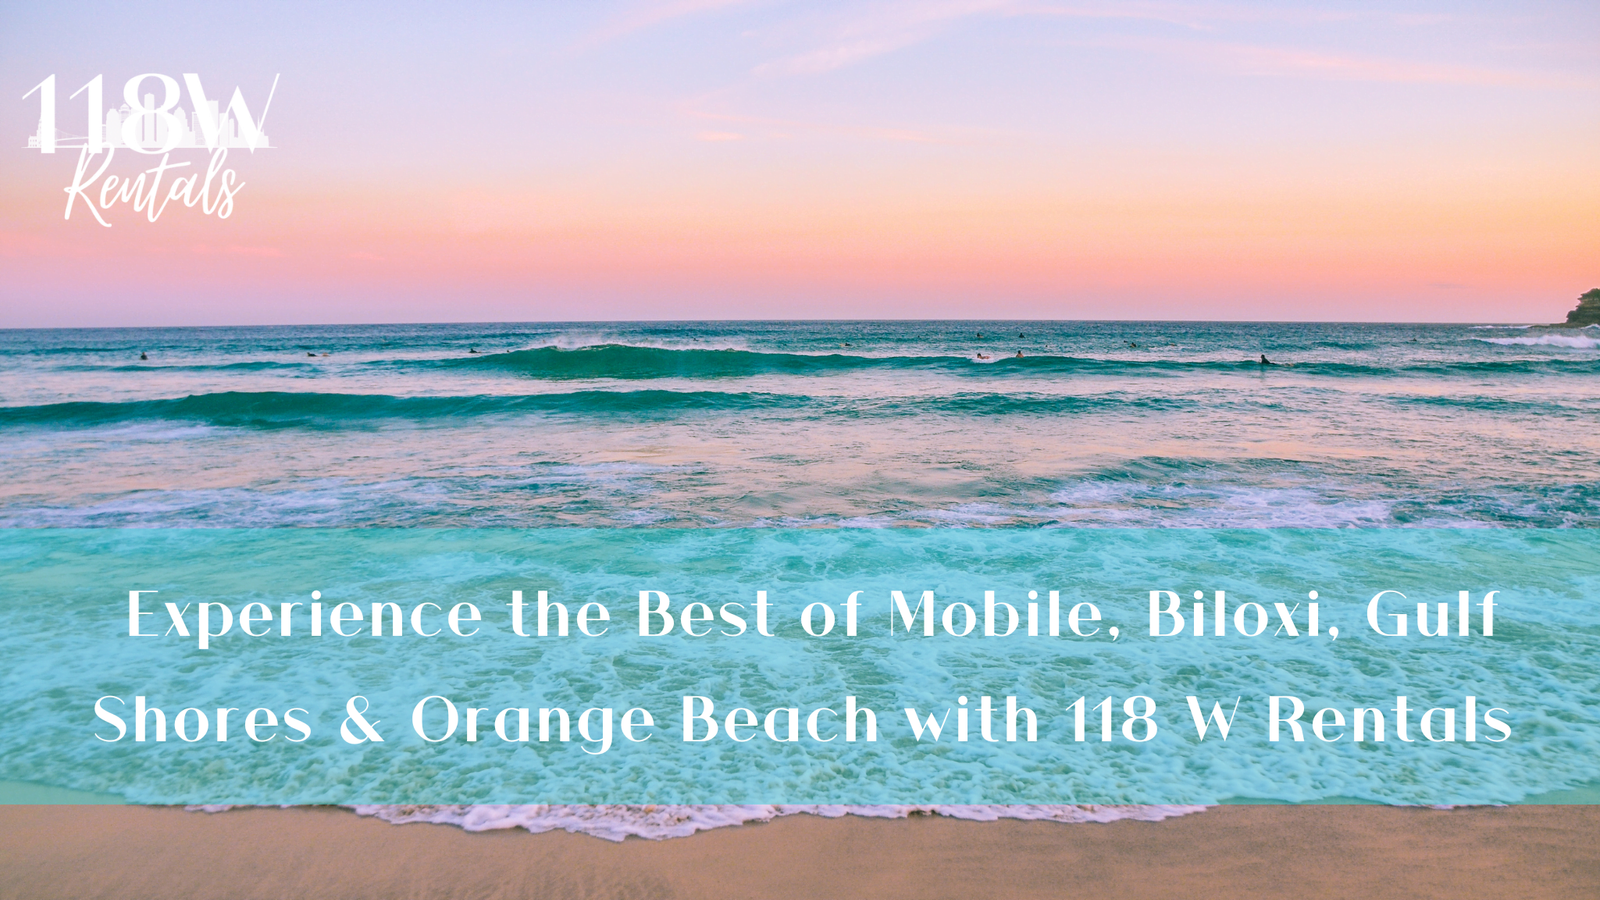 Experience the Best of Mobile, Biloxi, Gulf Shores & Orange Beach with 118 W Rentals